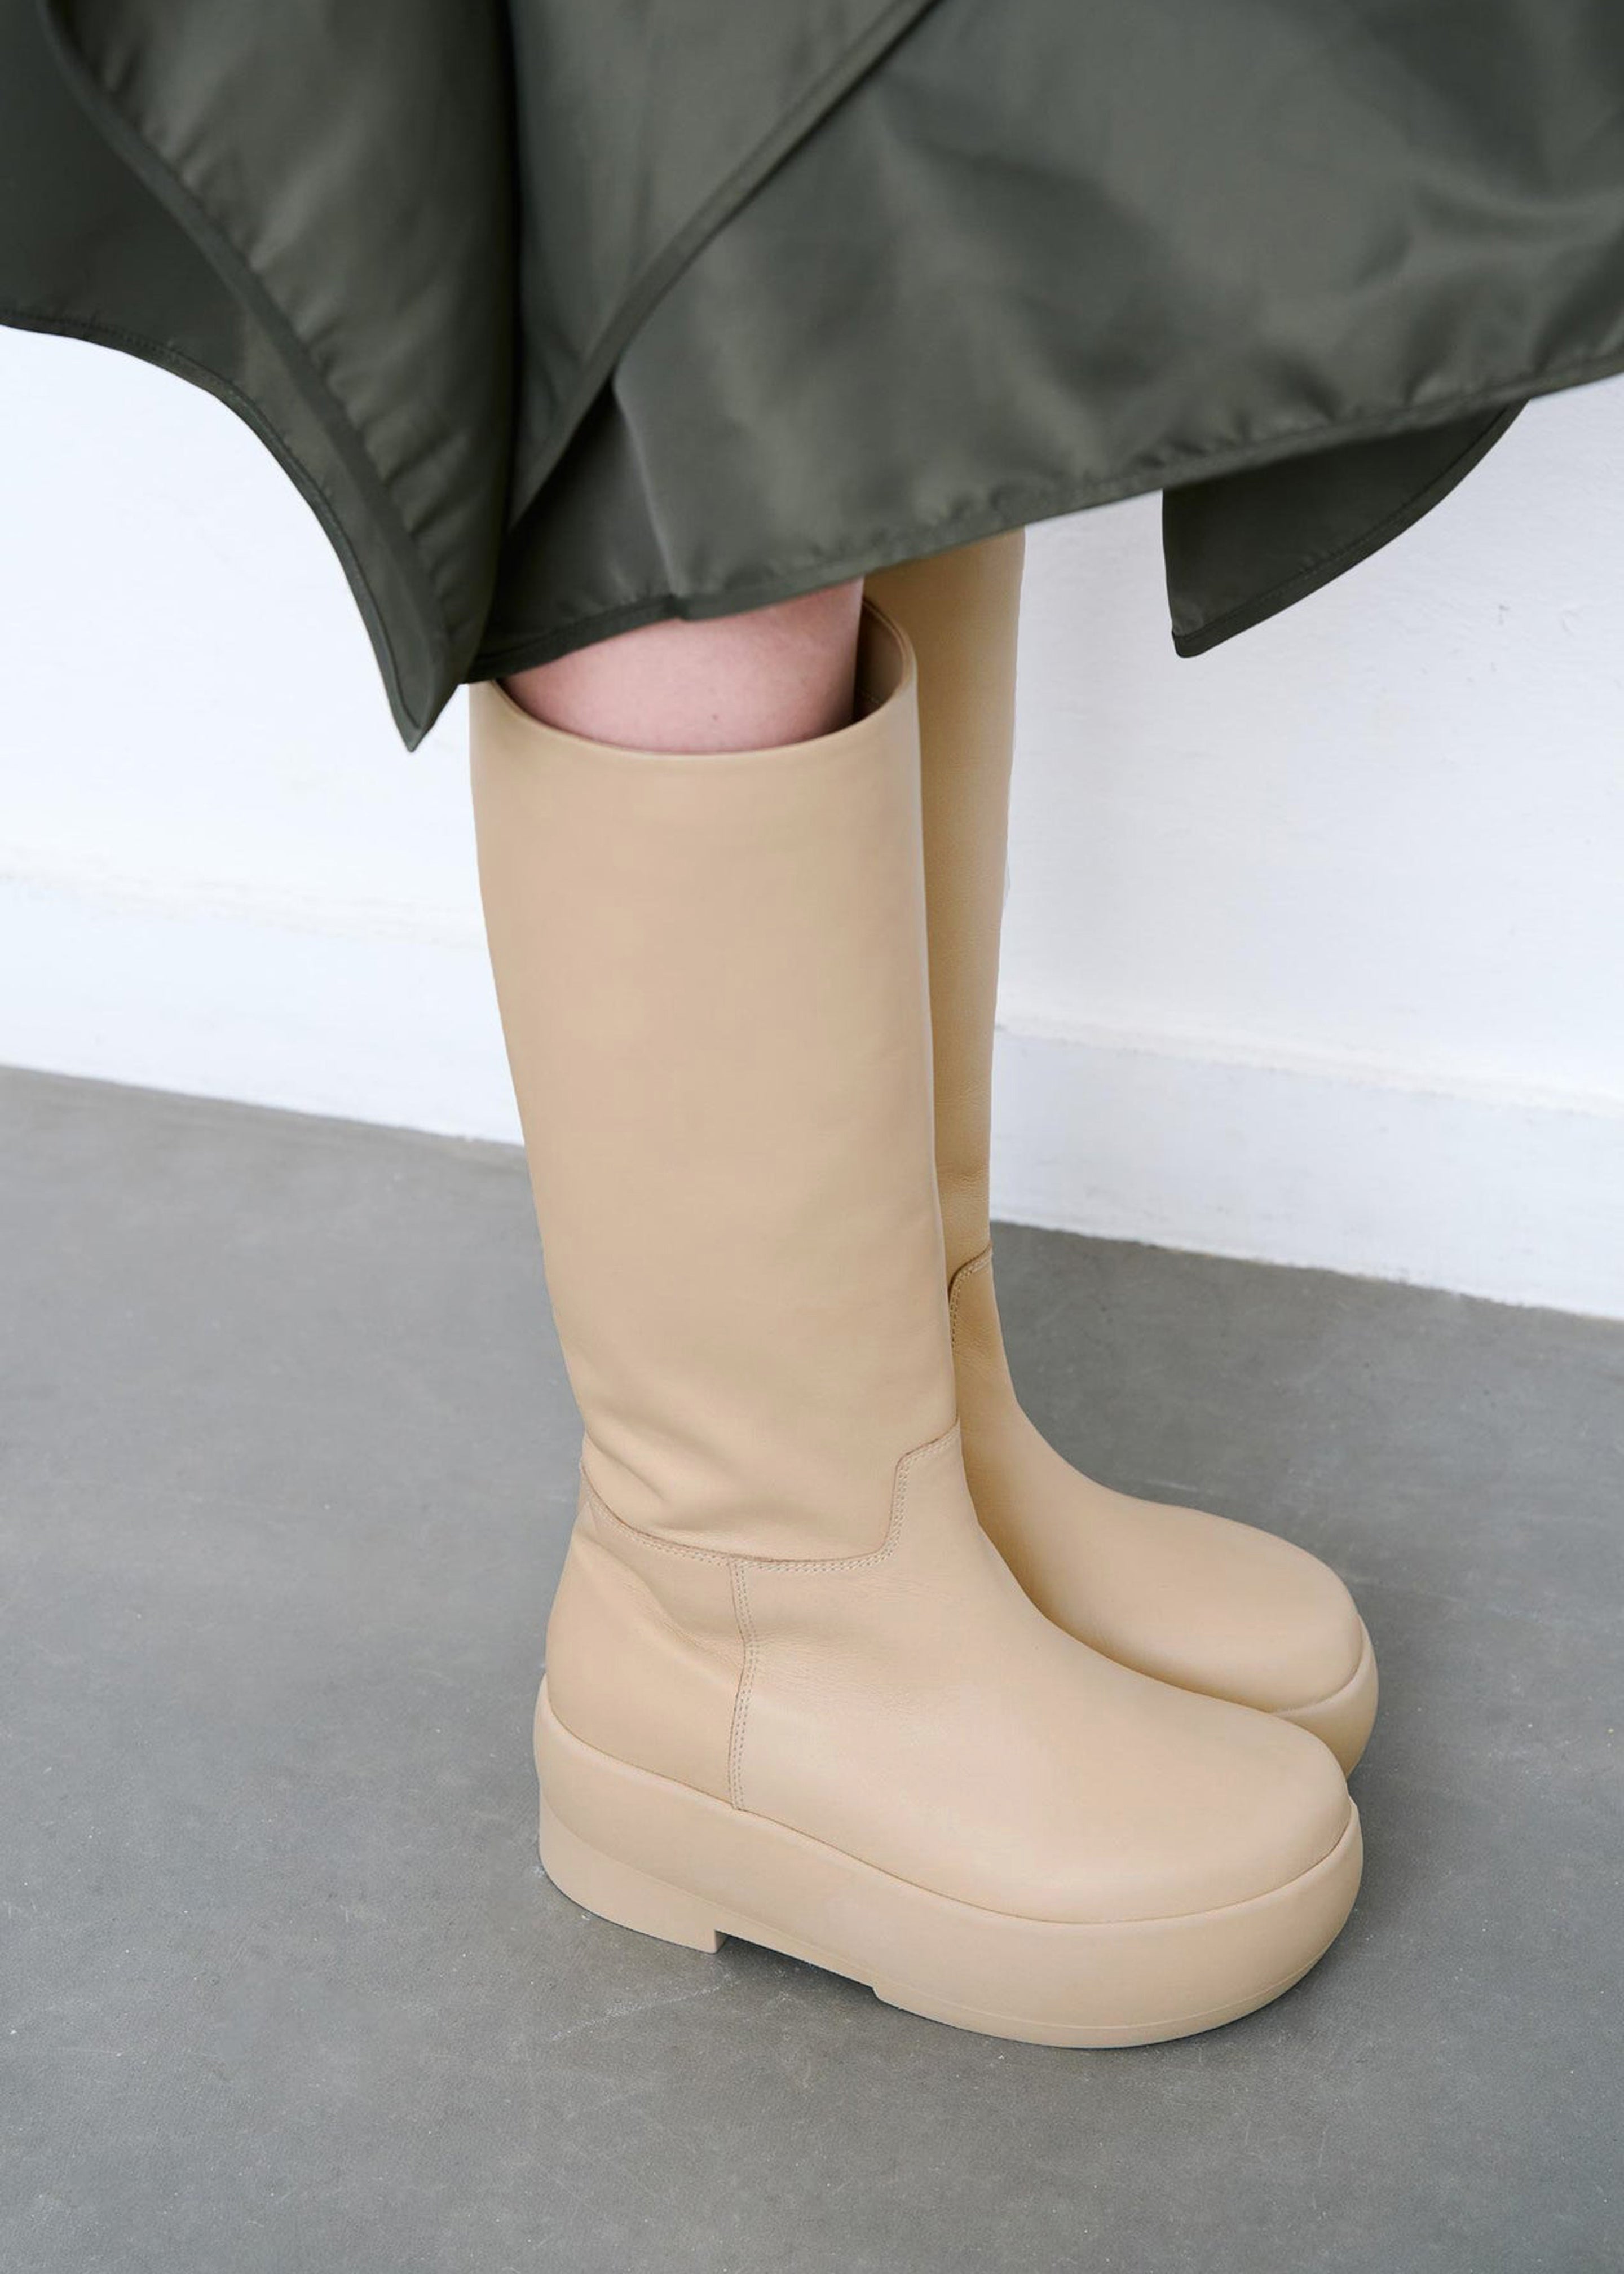  Other Stories Leather Platform Knee High Boots